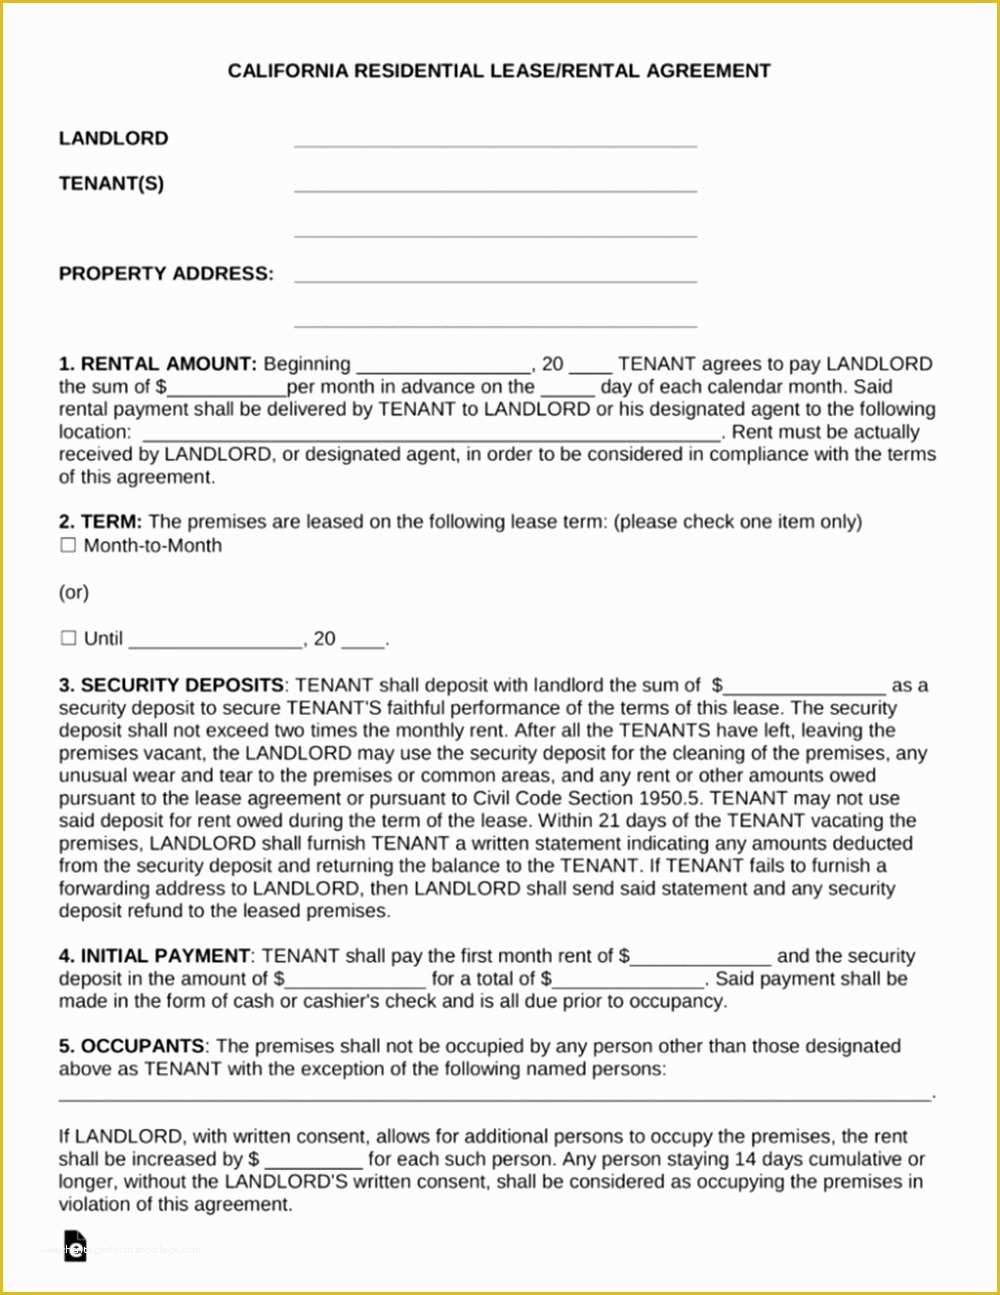 Free Boat Sharing Agreement Template Of Line Samples Rental Agreements 650 841 Free California